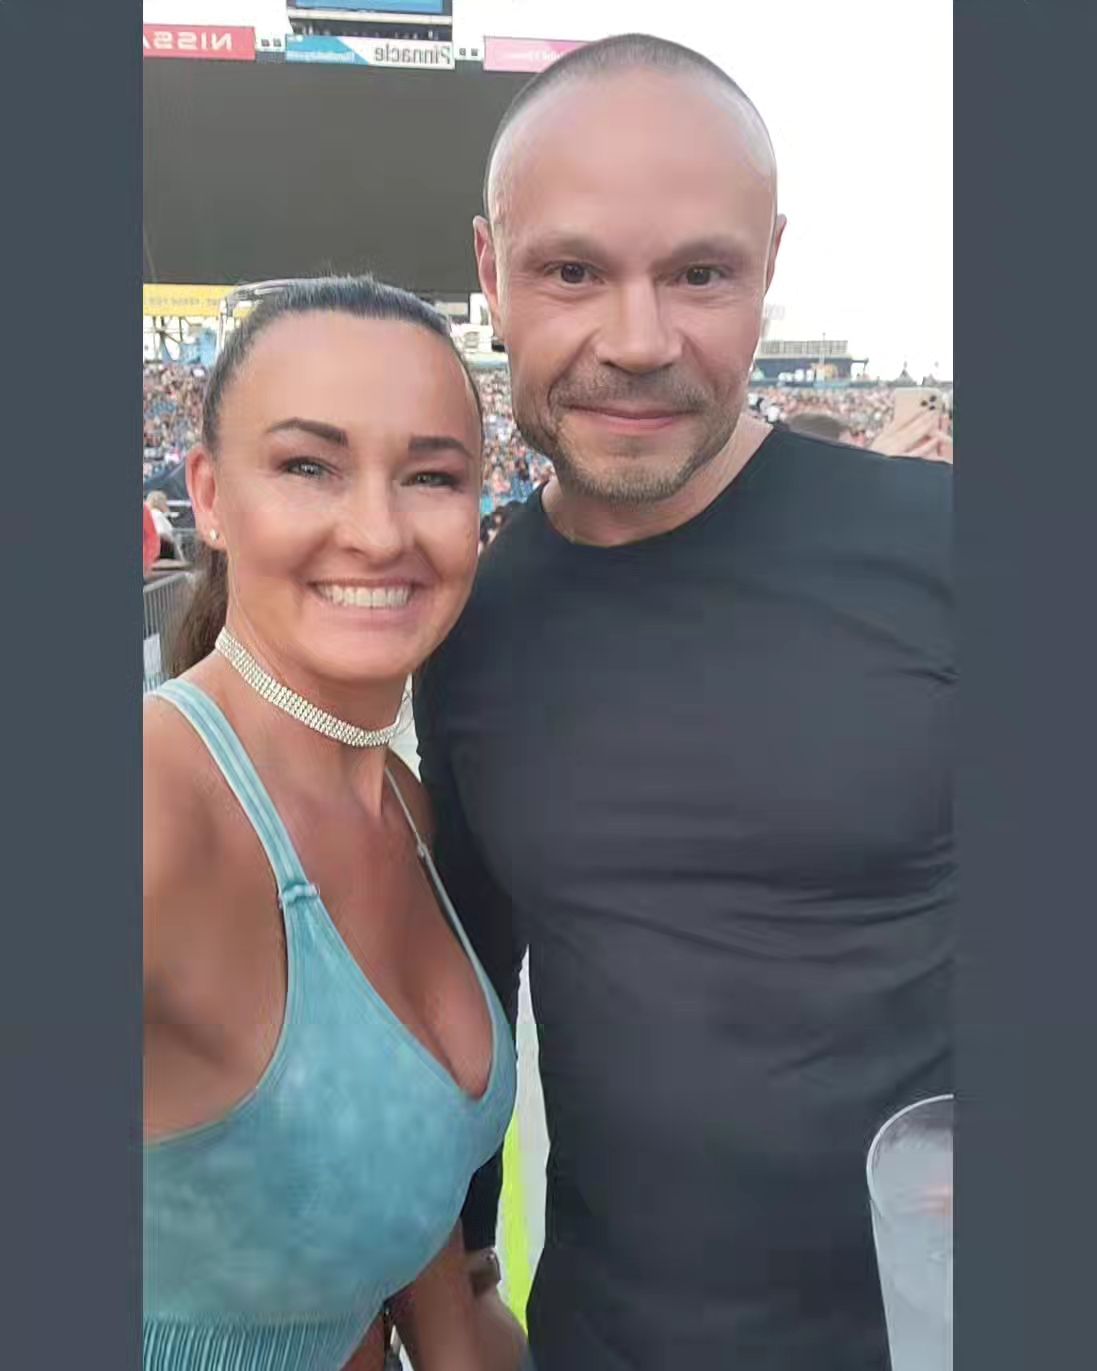 I got to meet @dbongino and his wife at the @morganwallen concert on my birthday! I let him know i was a fan.  He was super nice.